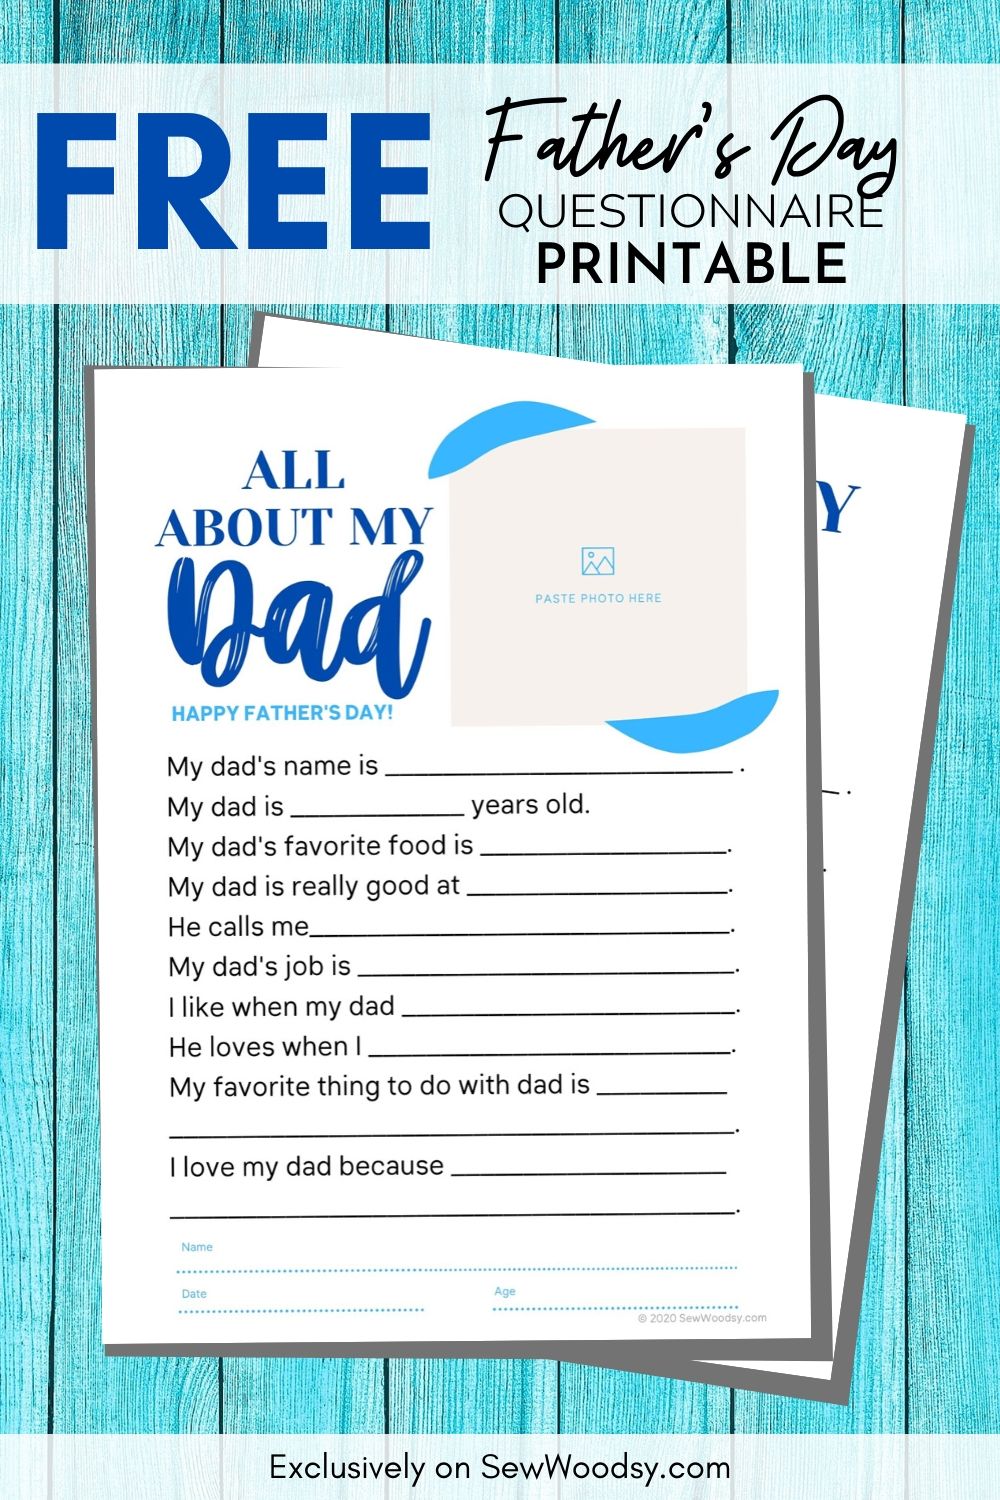 Advertising Free Father's Day Questionnaire Printable with text and printout for Pinterest.